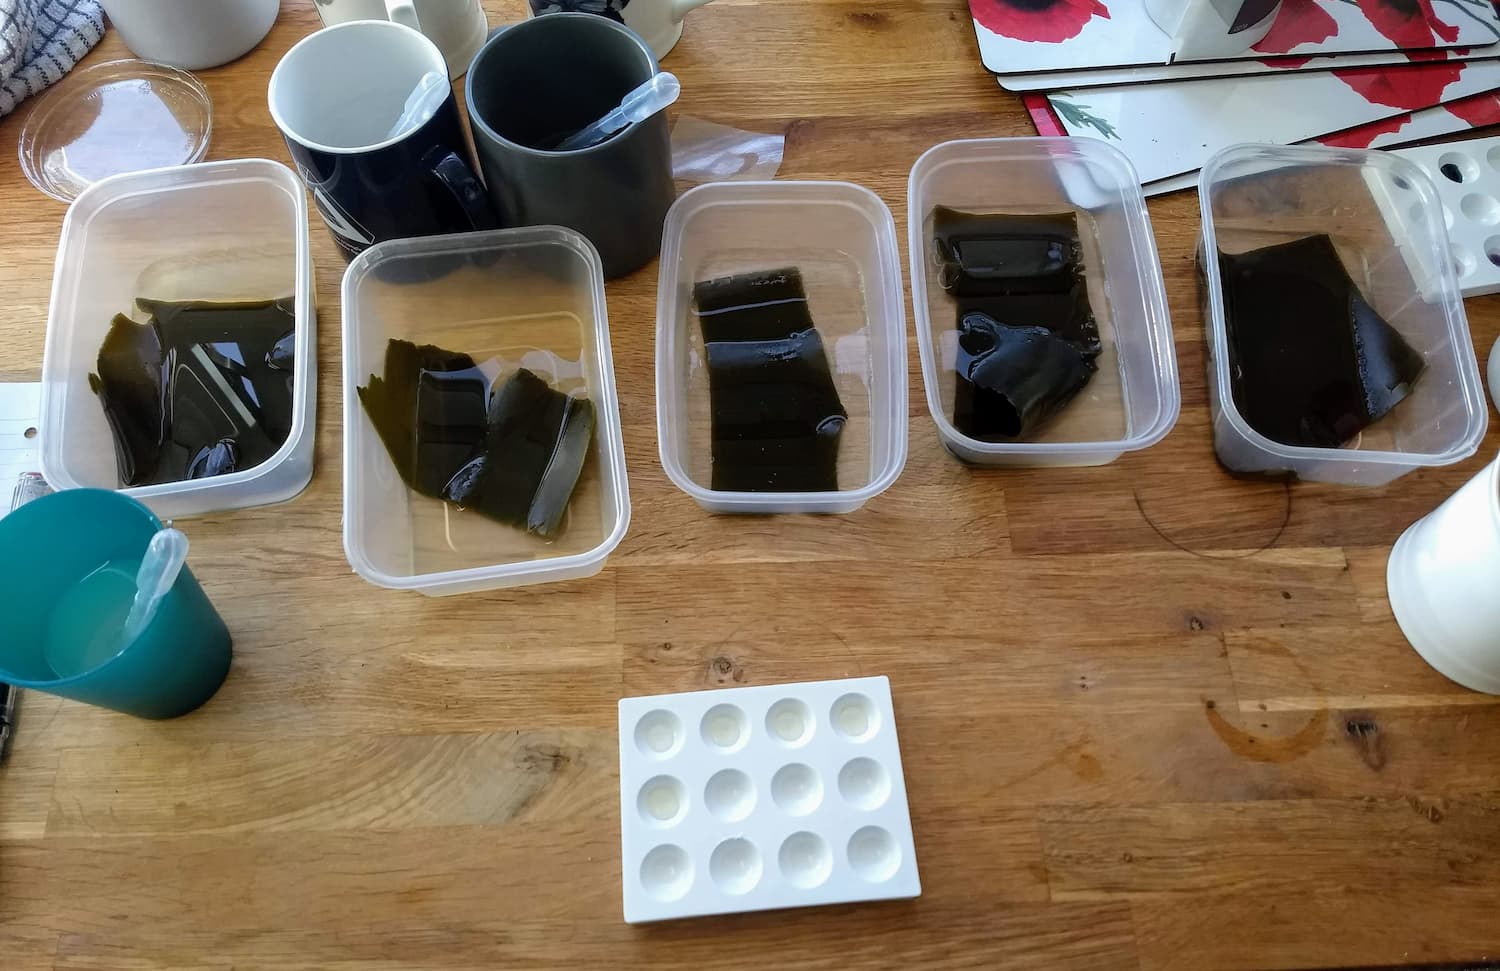 Samples of kombu set up in a row, surrounded by experimental equipment